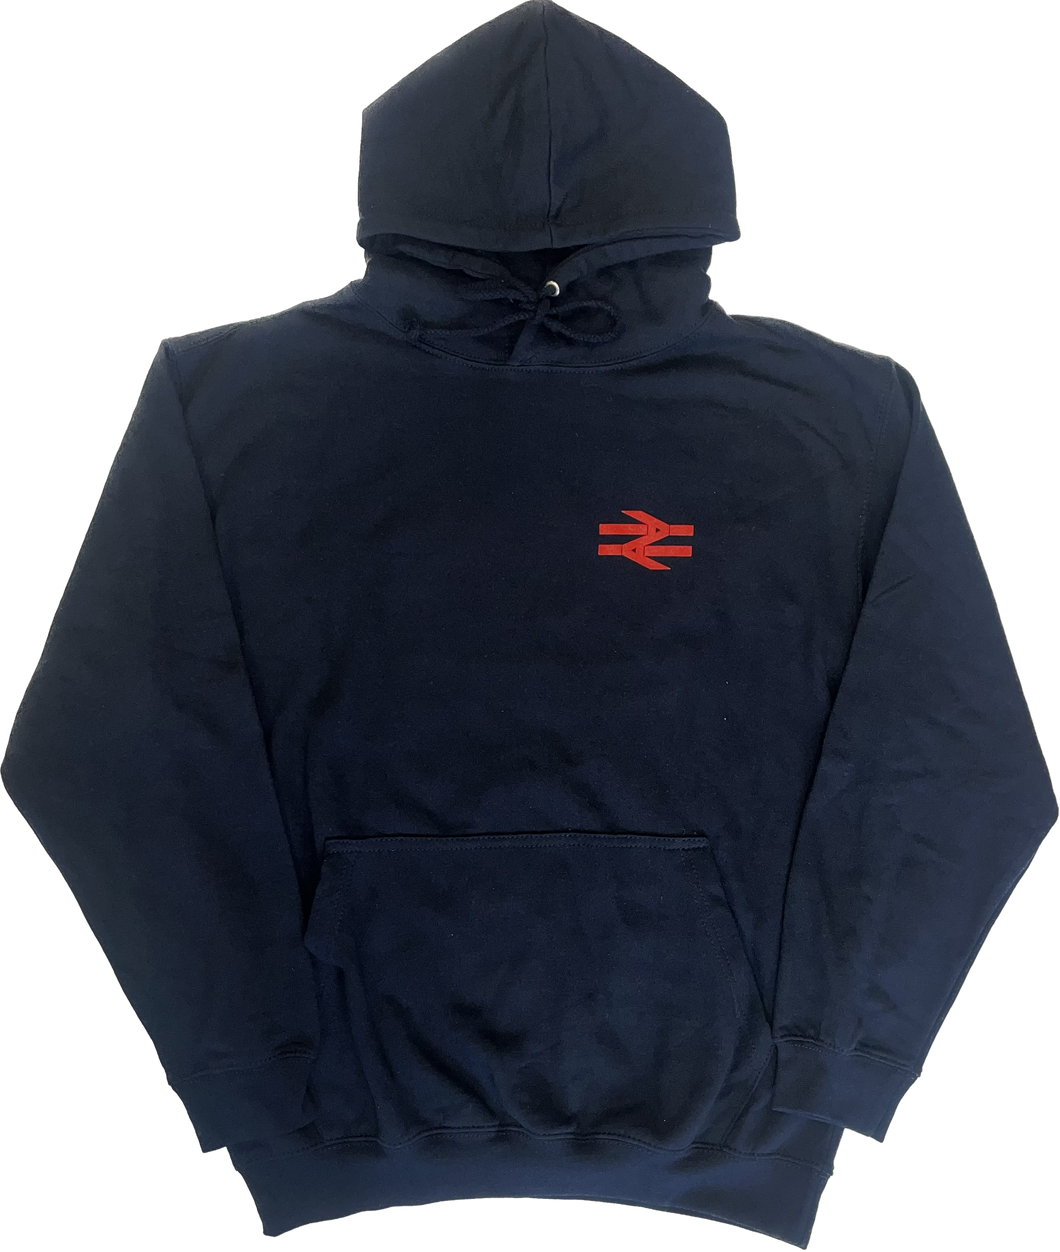 All Aboard 'National Rail' Hoodie - Various Sizes